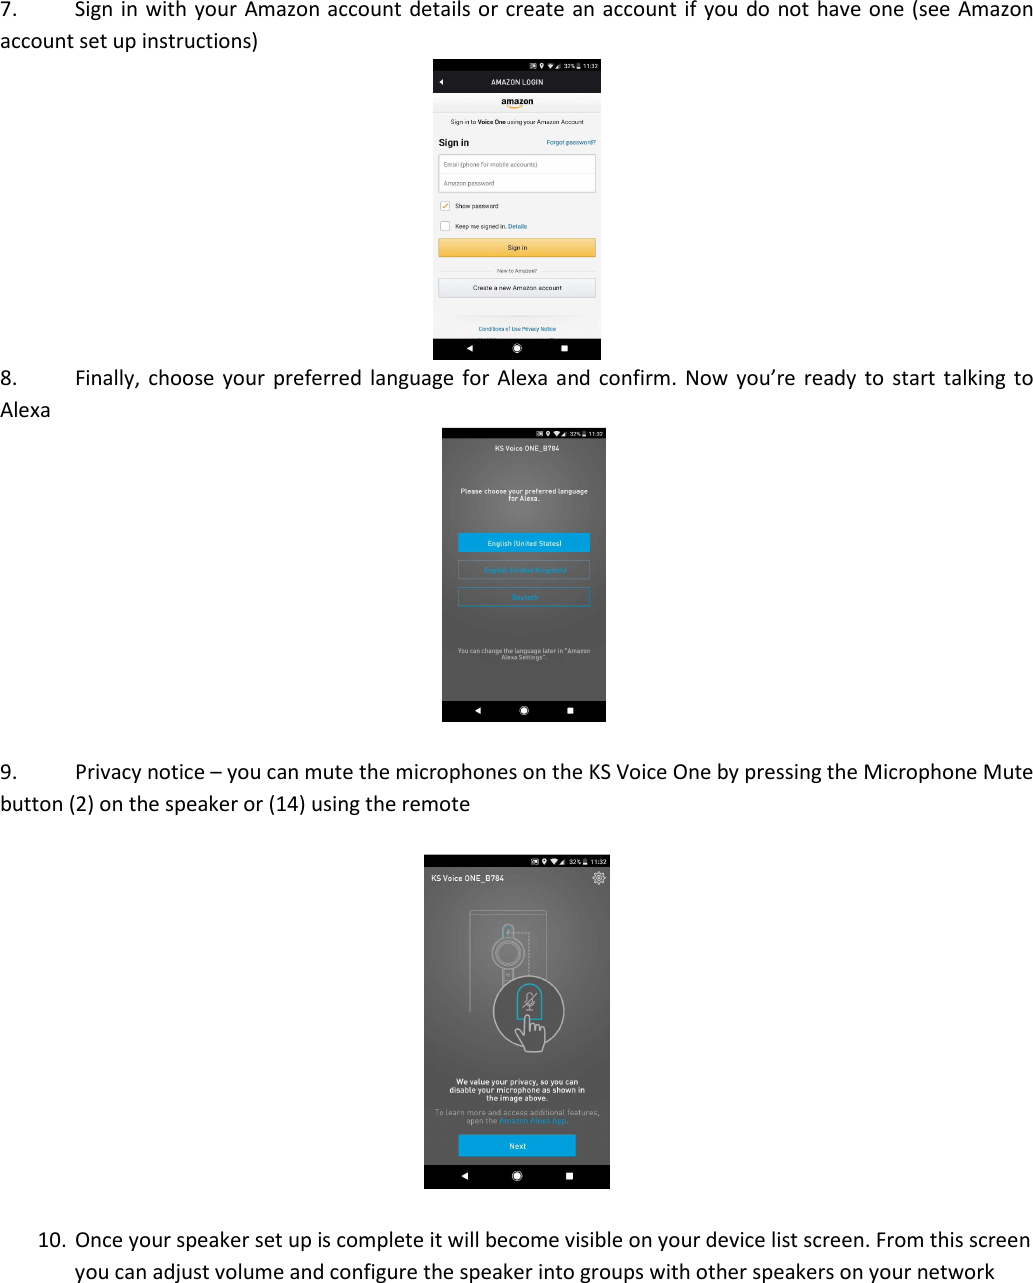 7. Sign in with your  Amazon account details or create  an account if  you do not have one (see Amazon account set up instructions)  8. Finally,  choose  your  preferred language for  Alexa  and  confirm.  Now  you’re  ready  to  start talking to Alexa   9. Privacy notice – you can mute the microphones on the KS Voice One by pressing the Microphone Mute button (2) on the speaker or (14) using the remote    10. Once your speaker set up is complete it will become visible on your device list screen. From this screen you can adjust volume and configure the speaker into groups with other speakers on your network 